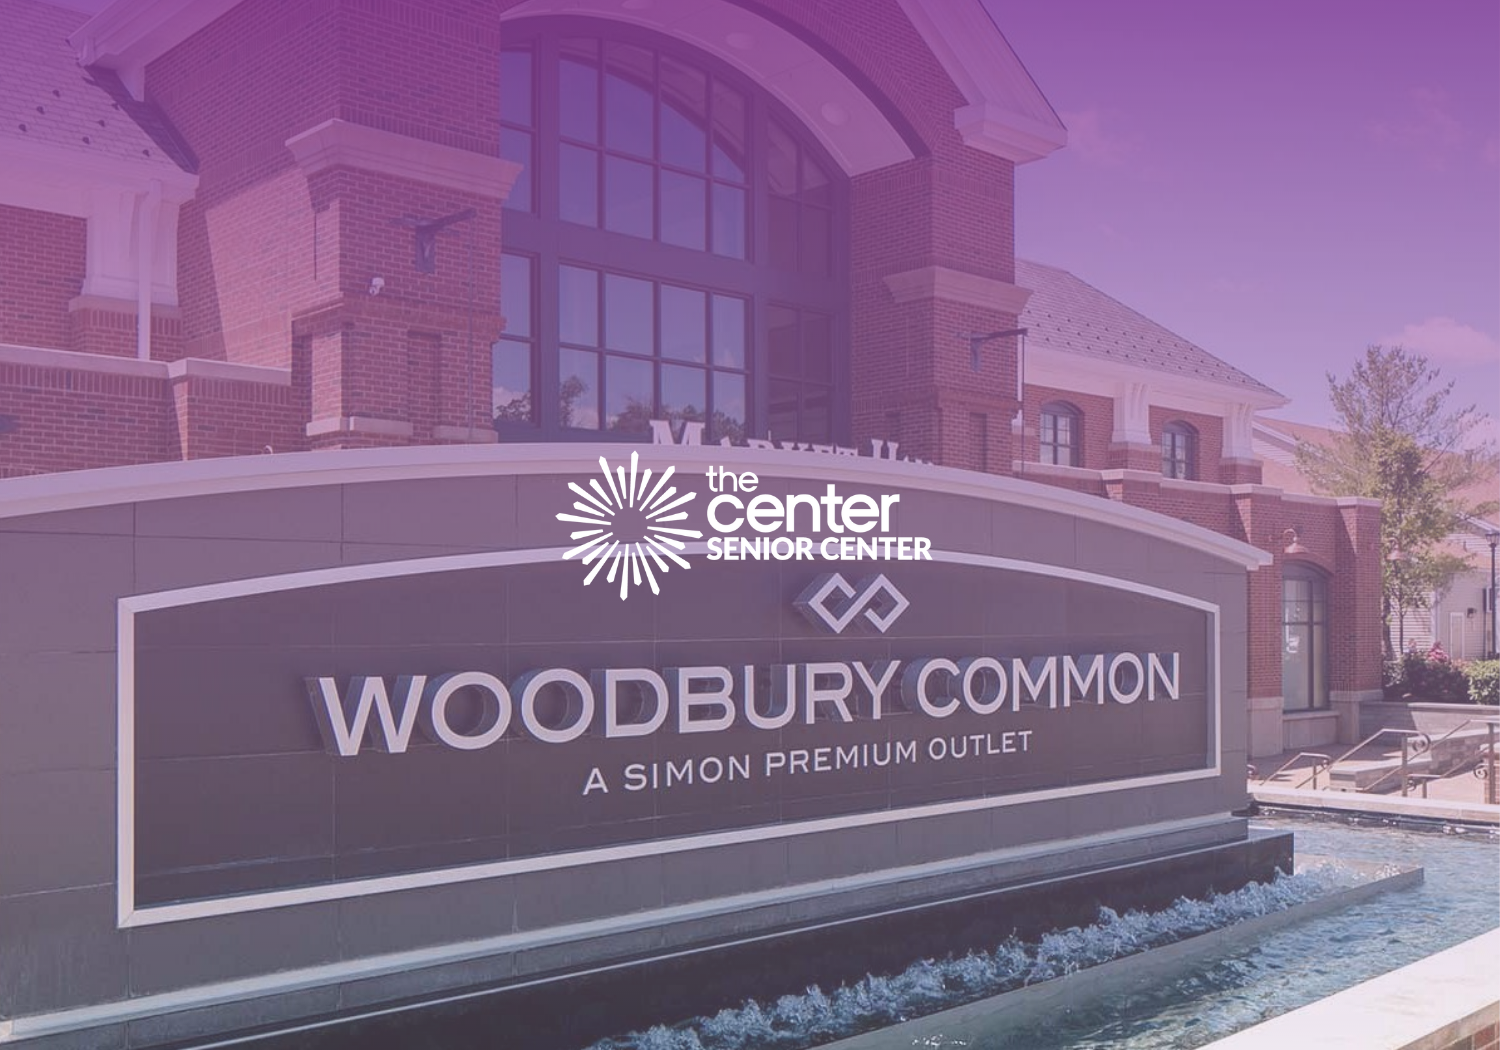 Three New Stores Set To Open At Woodbury Common Premium Outlets